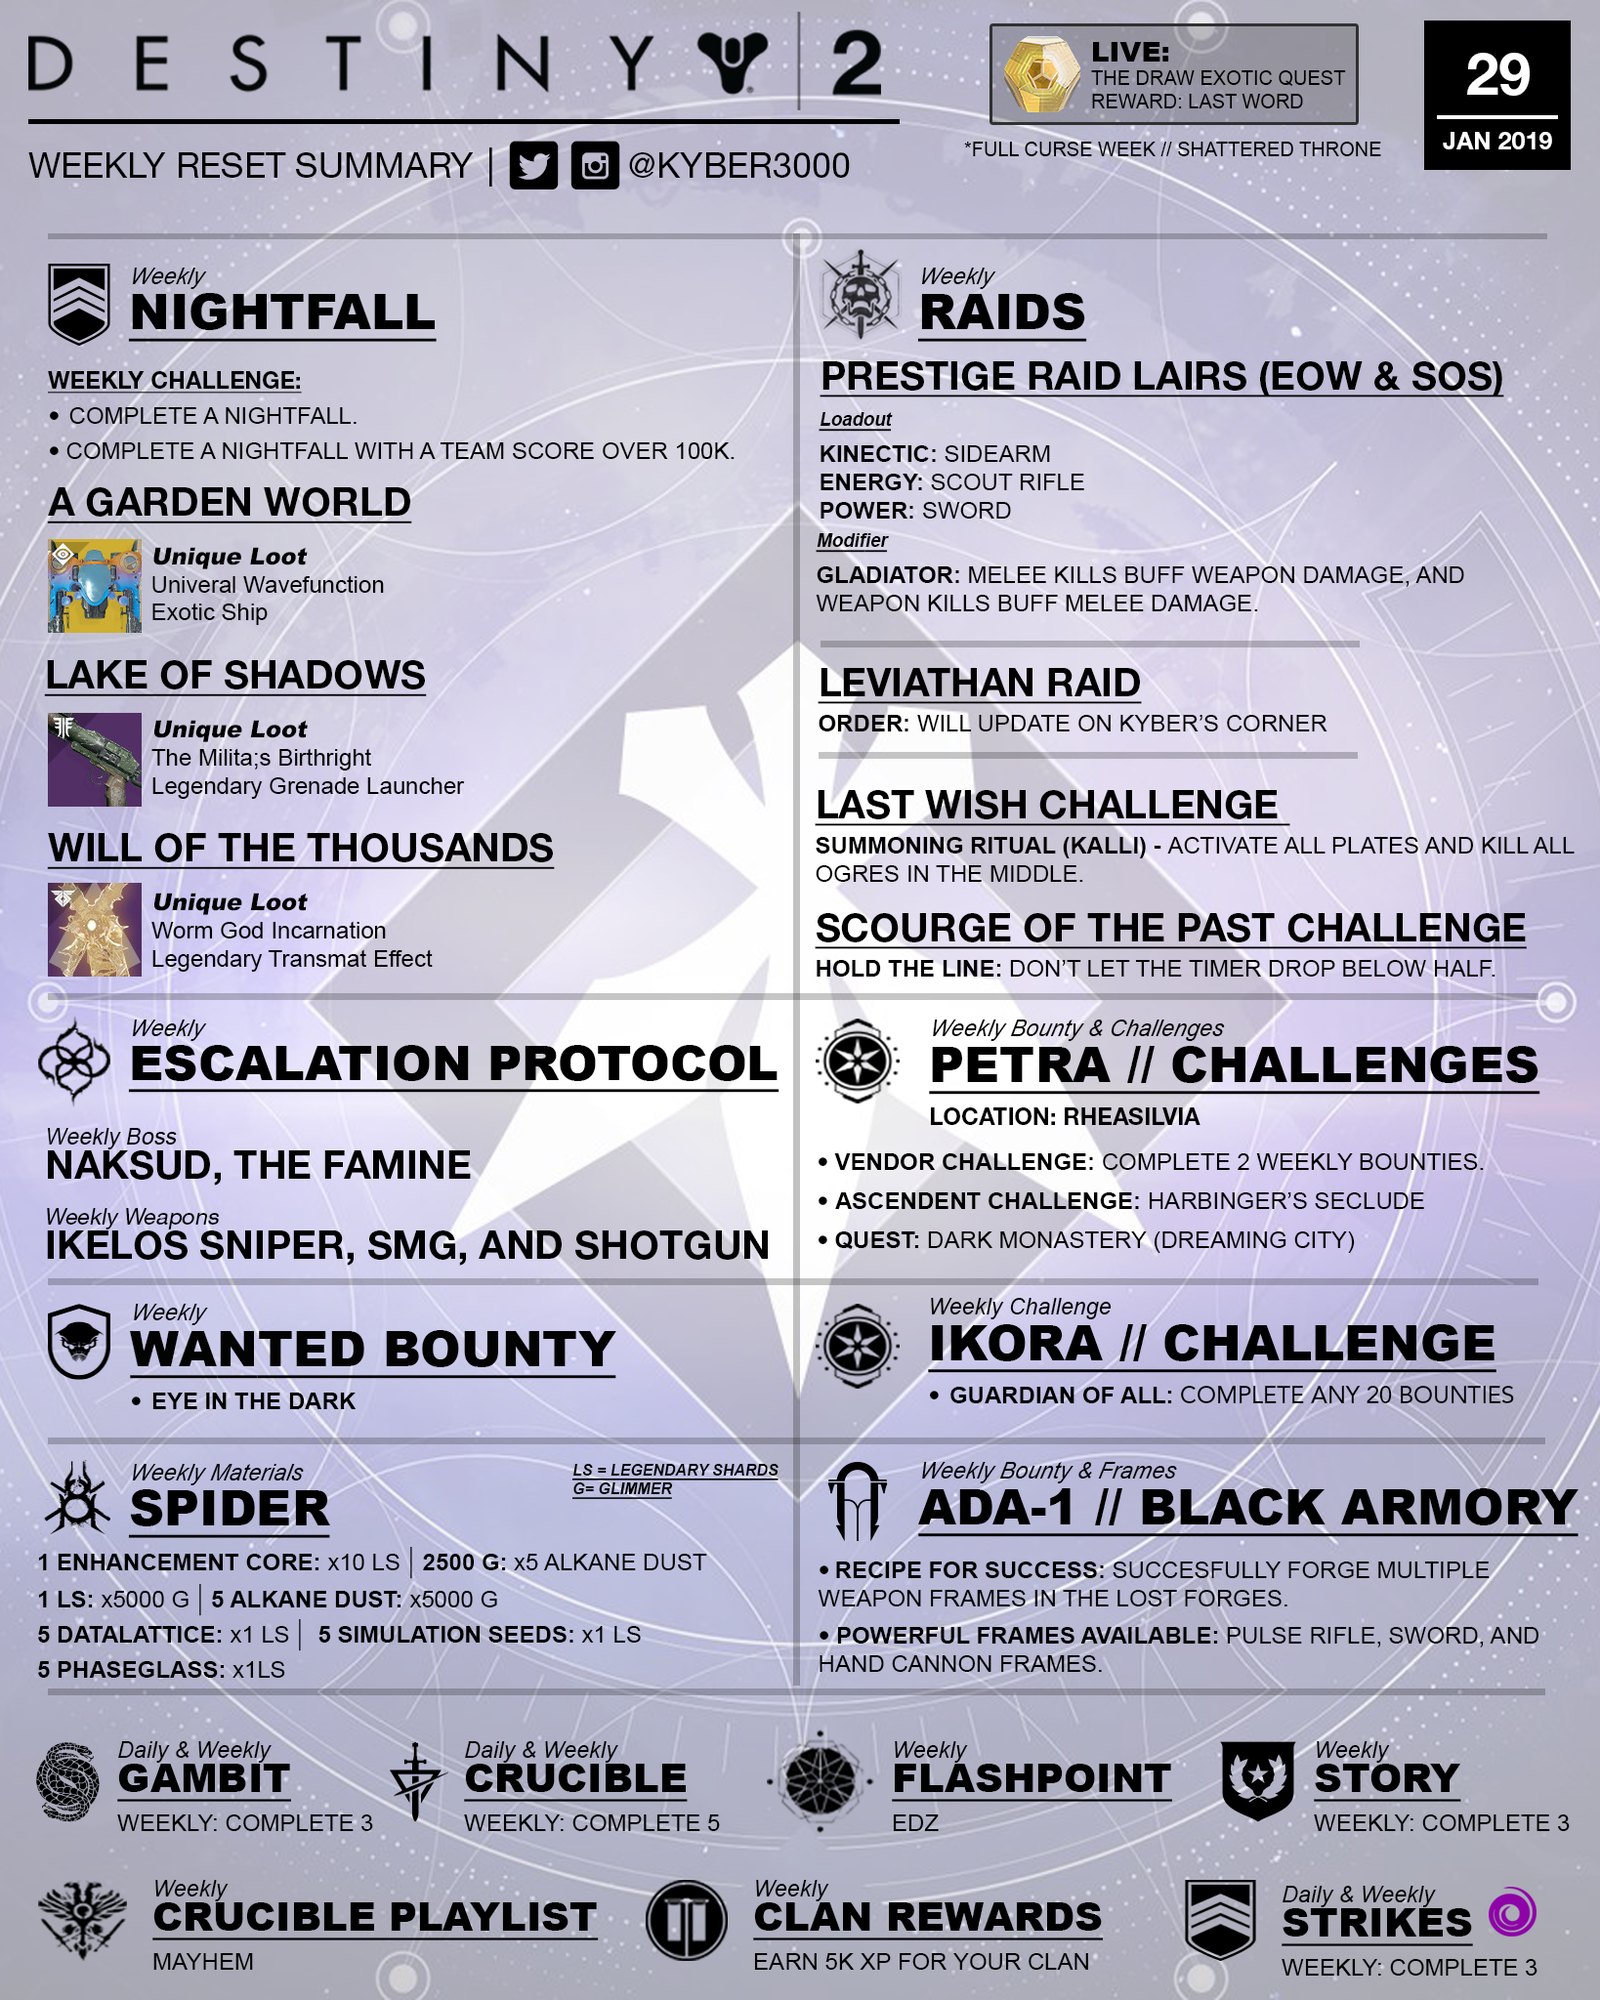 destiny-2-weekly-reset-by-kyber3000-01-29-19.png